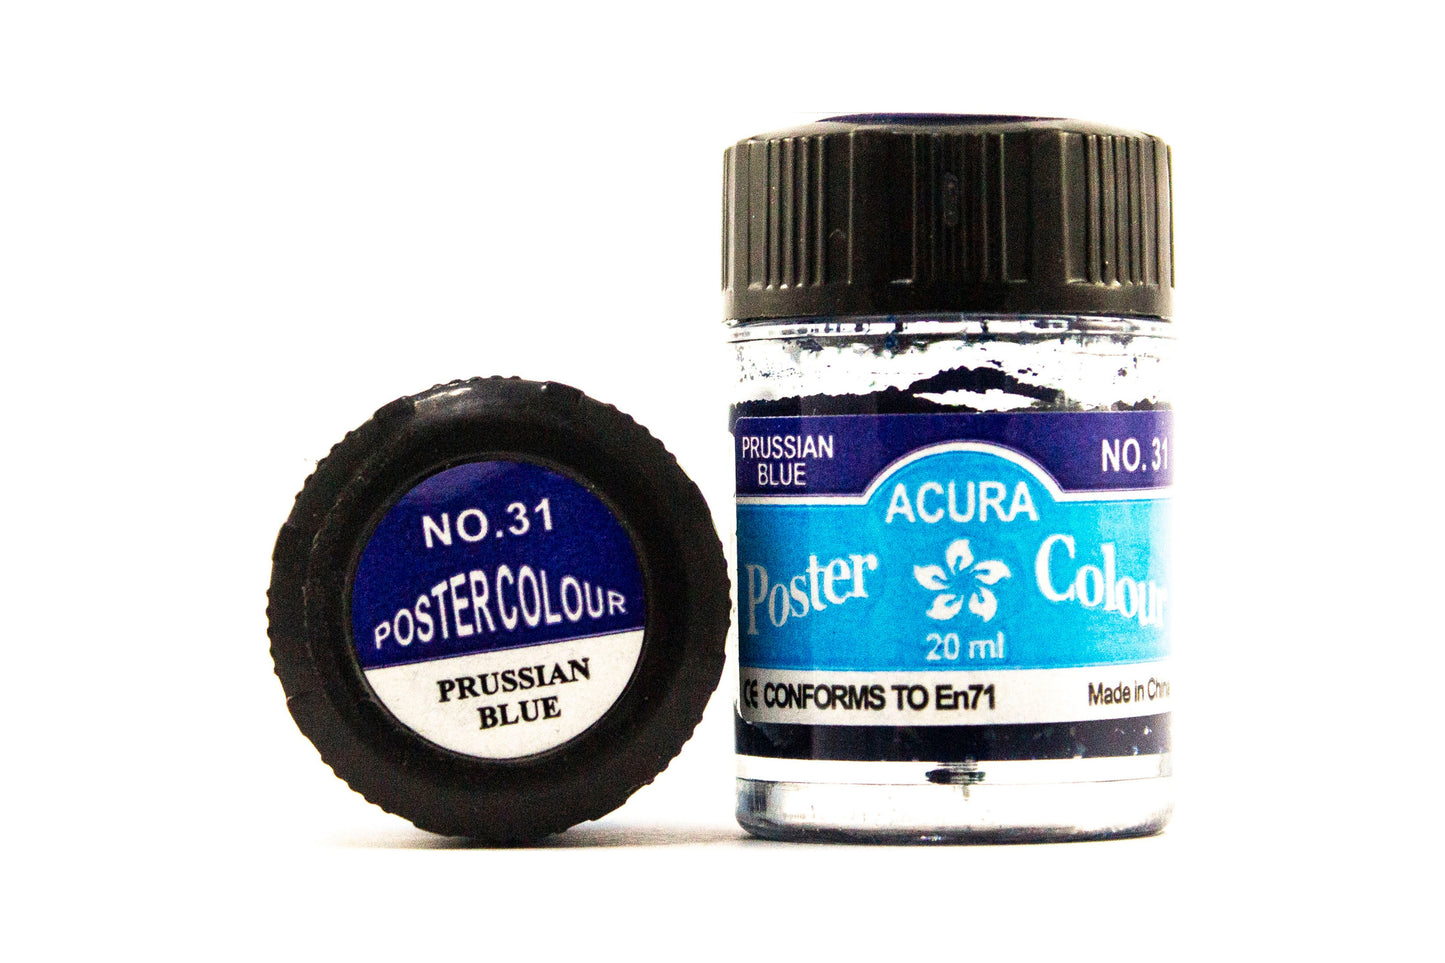 Acura Poster Color 20ml